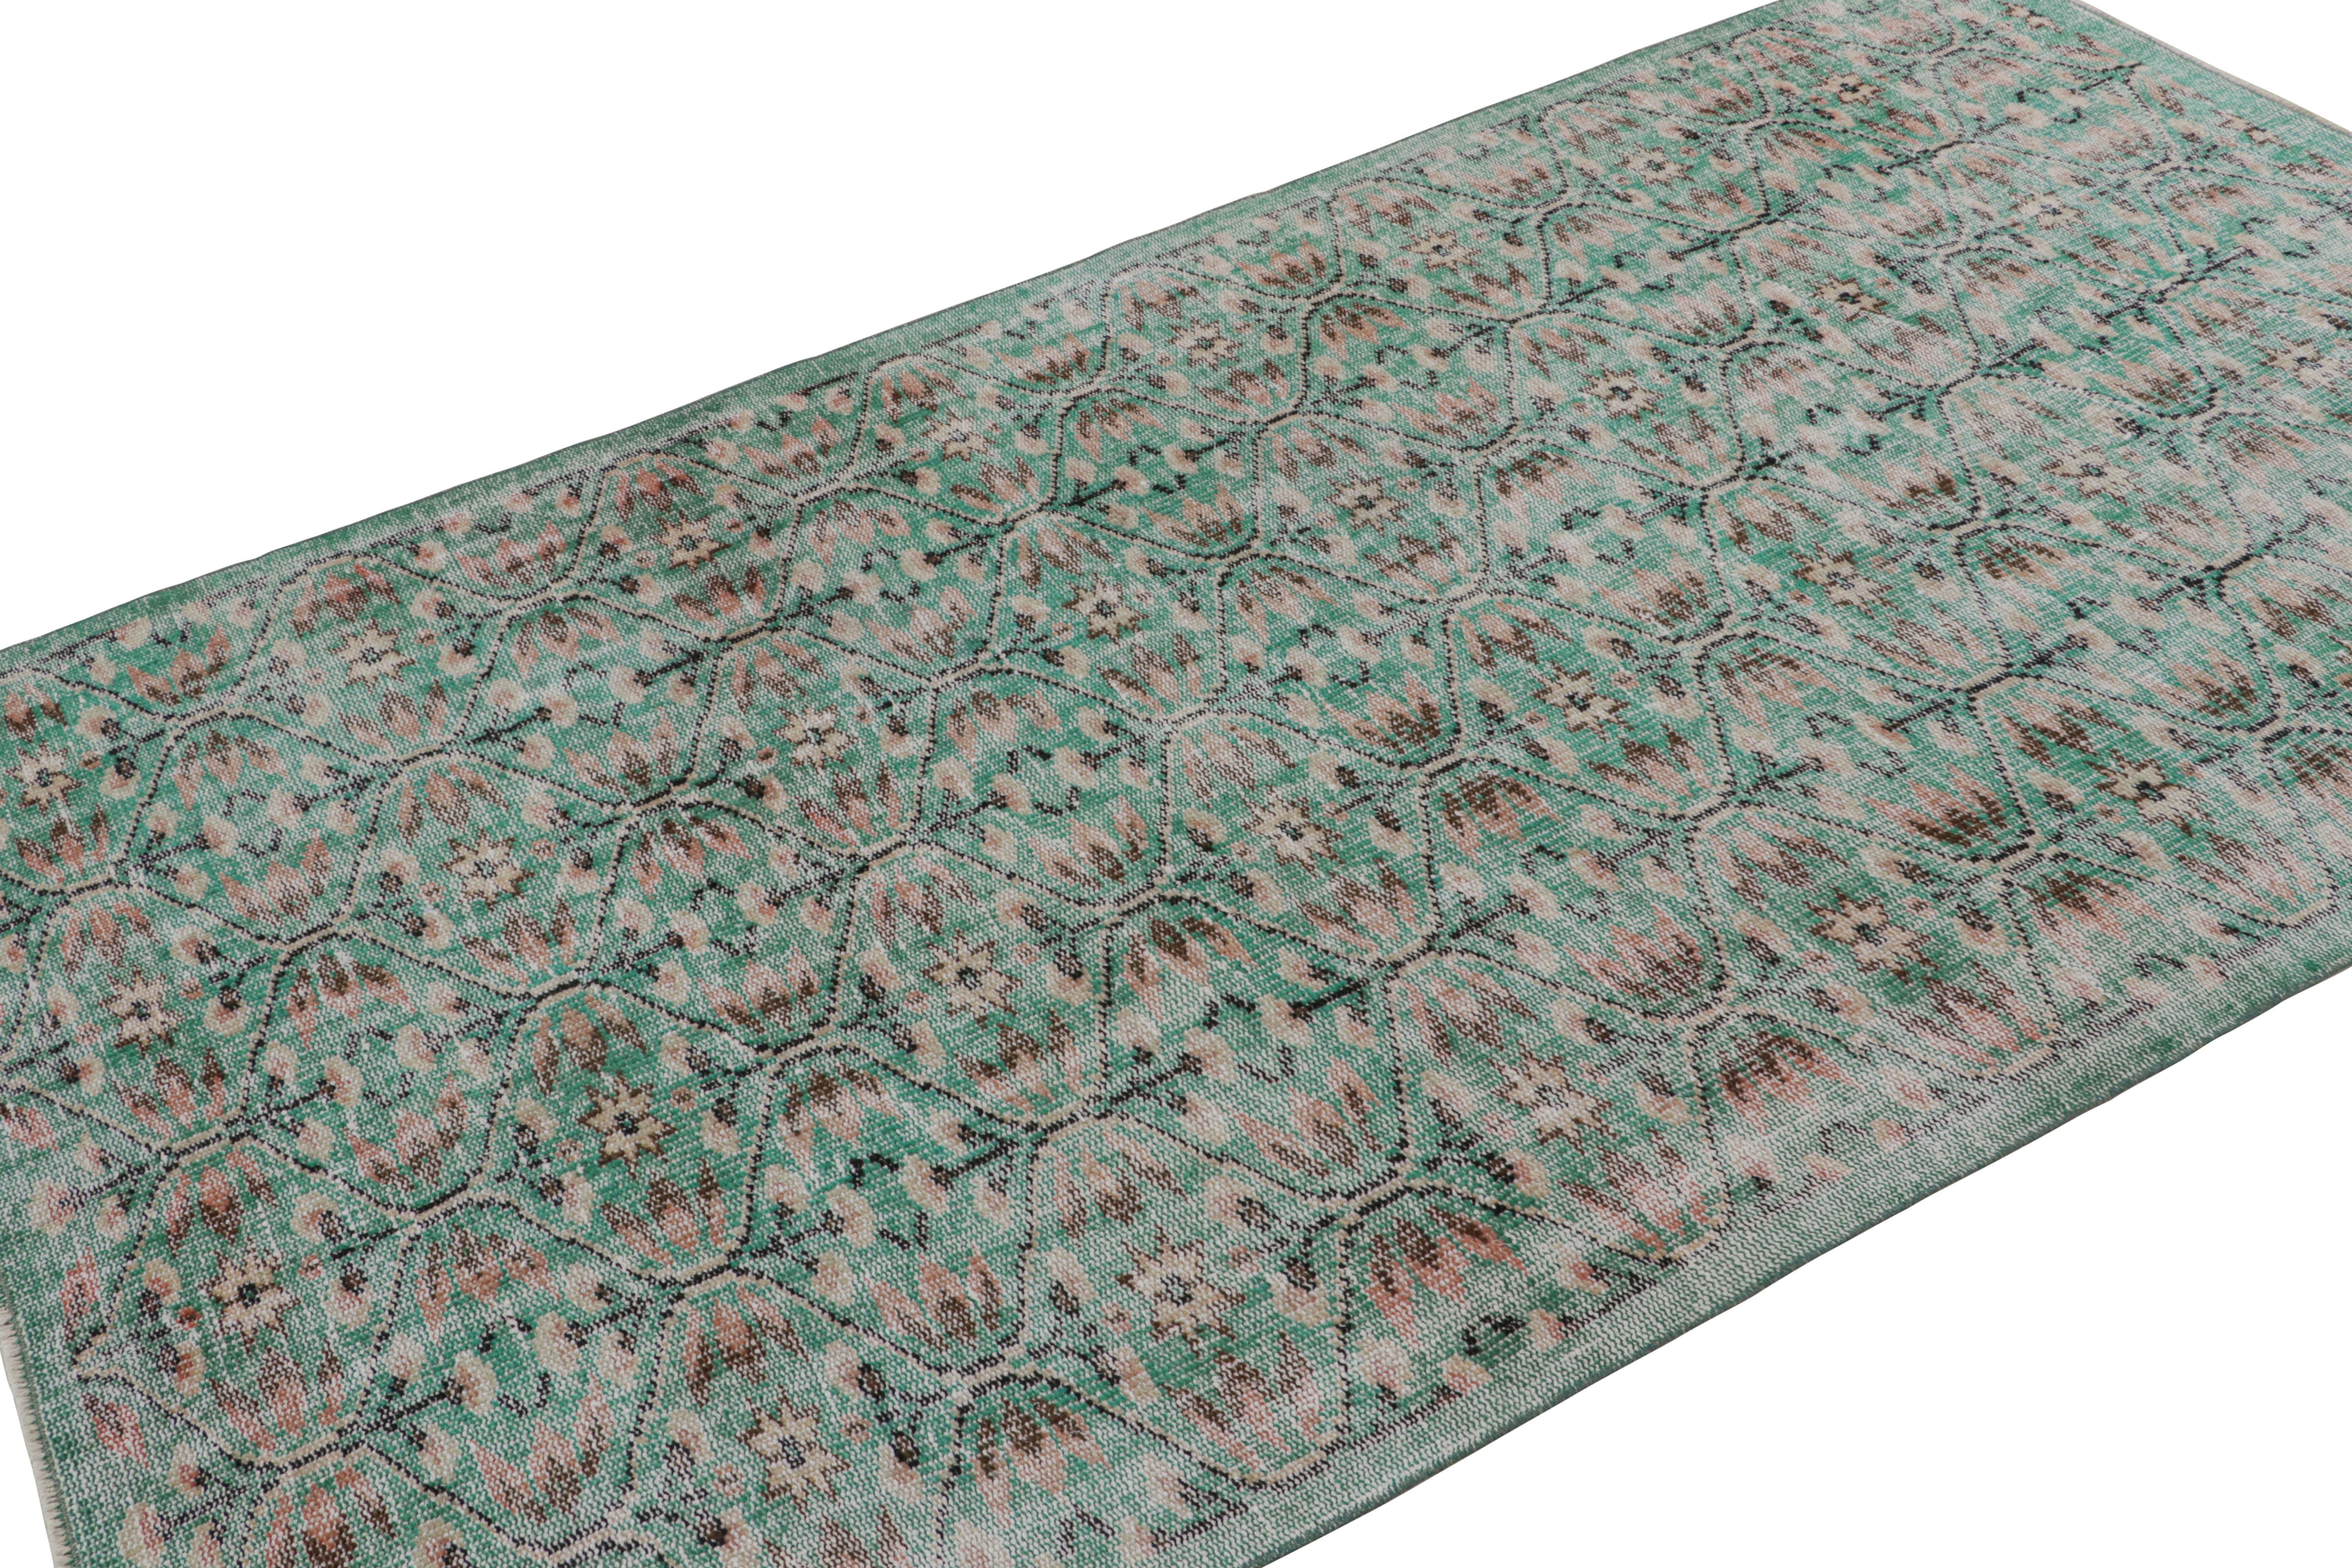 Handknotted in wool, this 5x8 vintage Art deco Zeki Múren runner originates from Turkey, circa 1960-1970 and is latest to join Rug & Kilim’s repertoire of vintage selections. 

On the Design:

Believed to hail from the Turkish artist Zeki Muren,